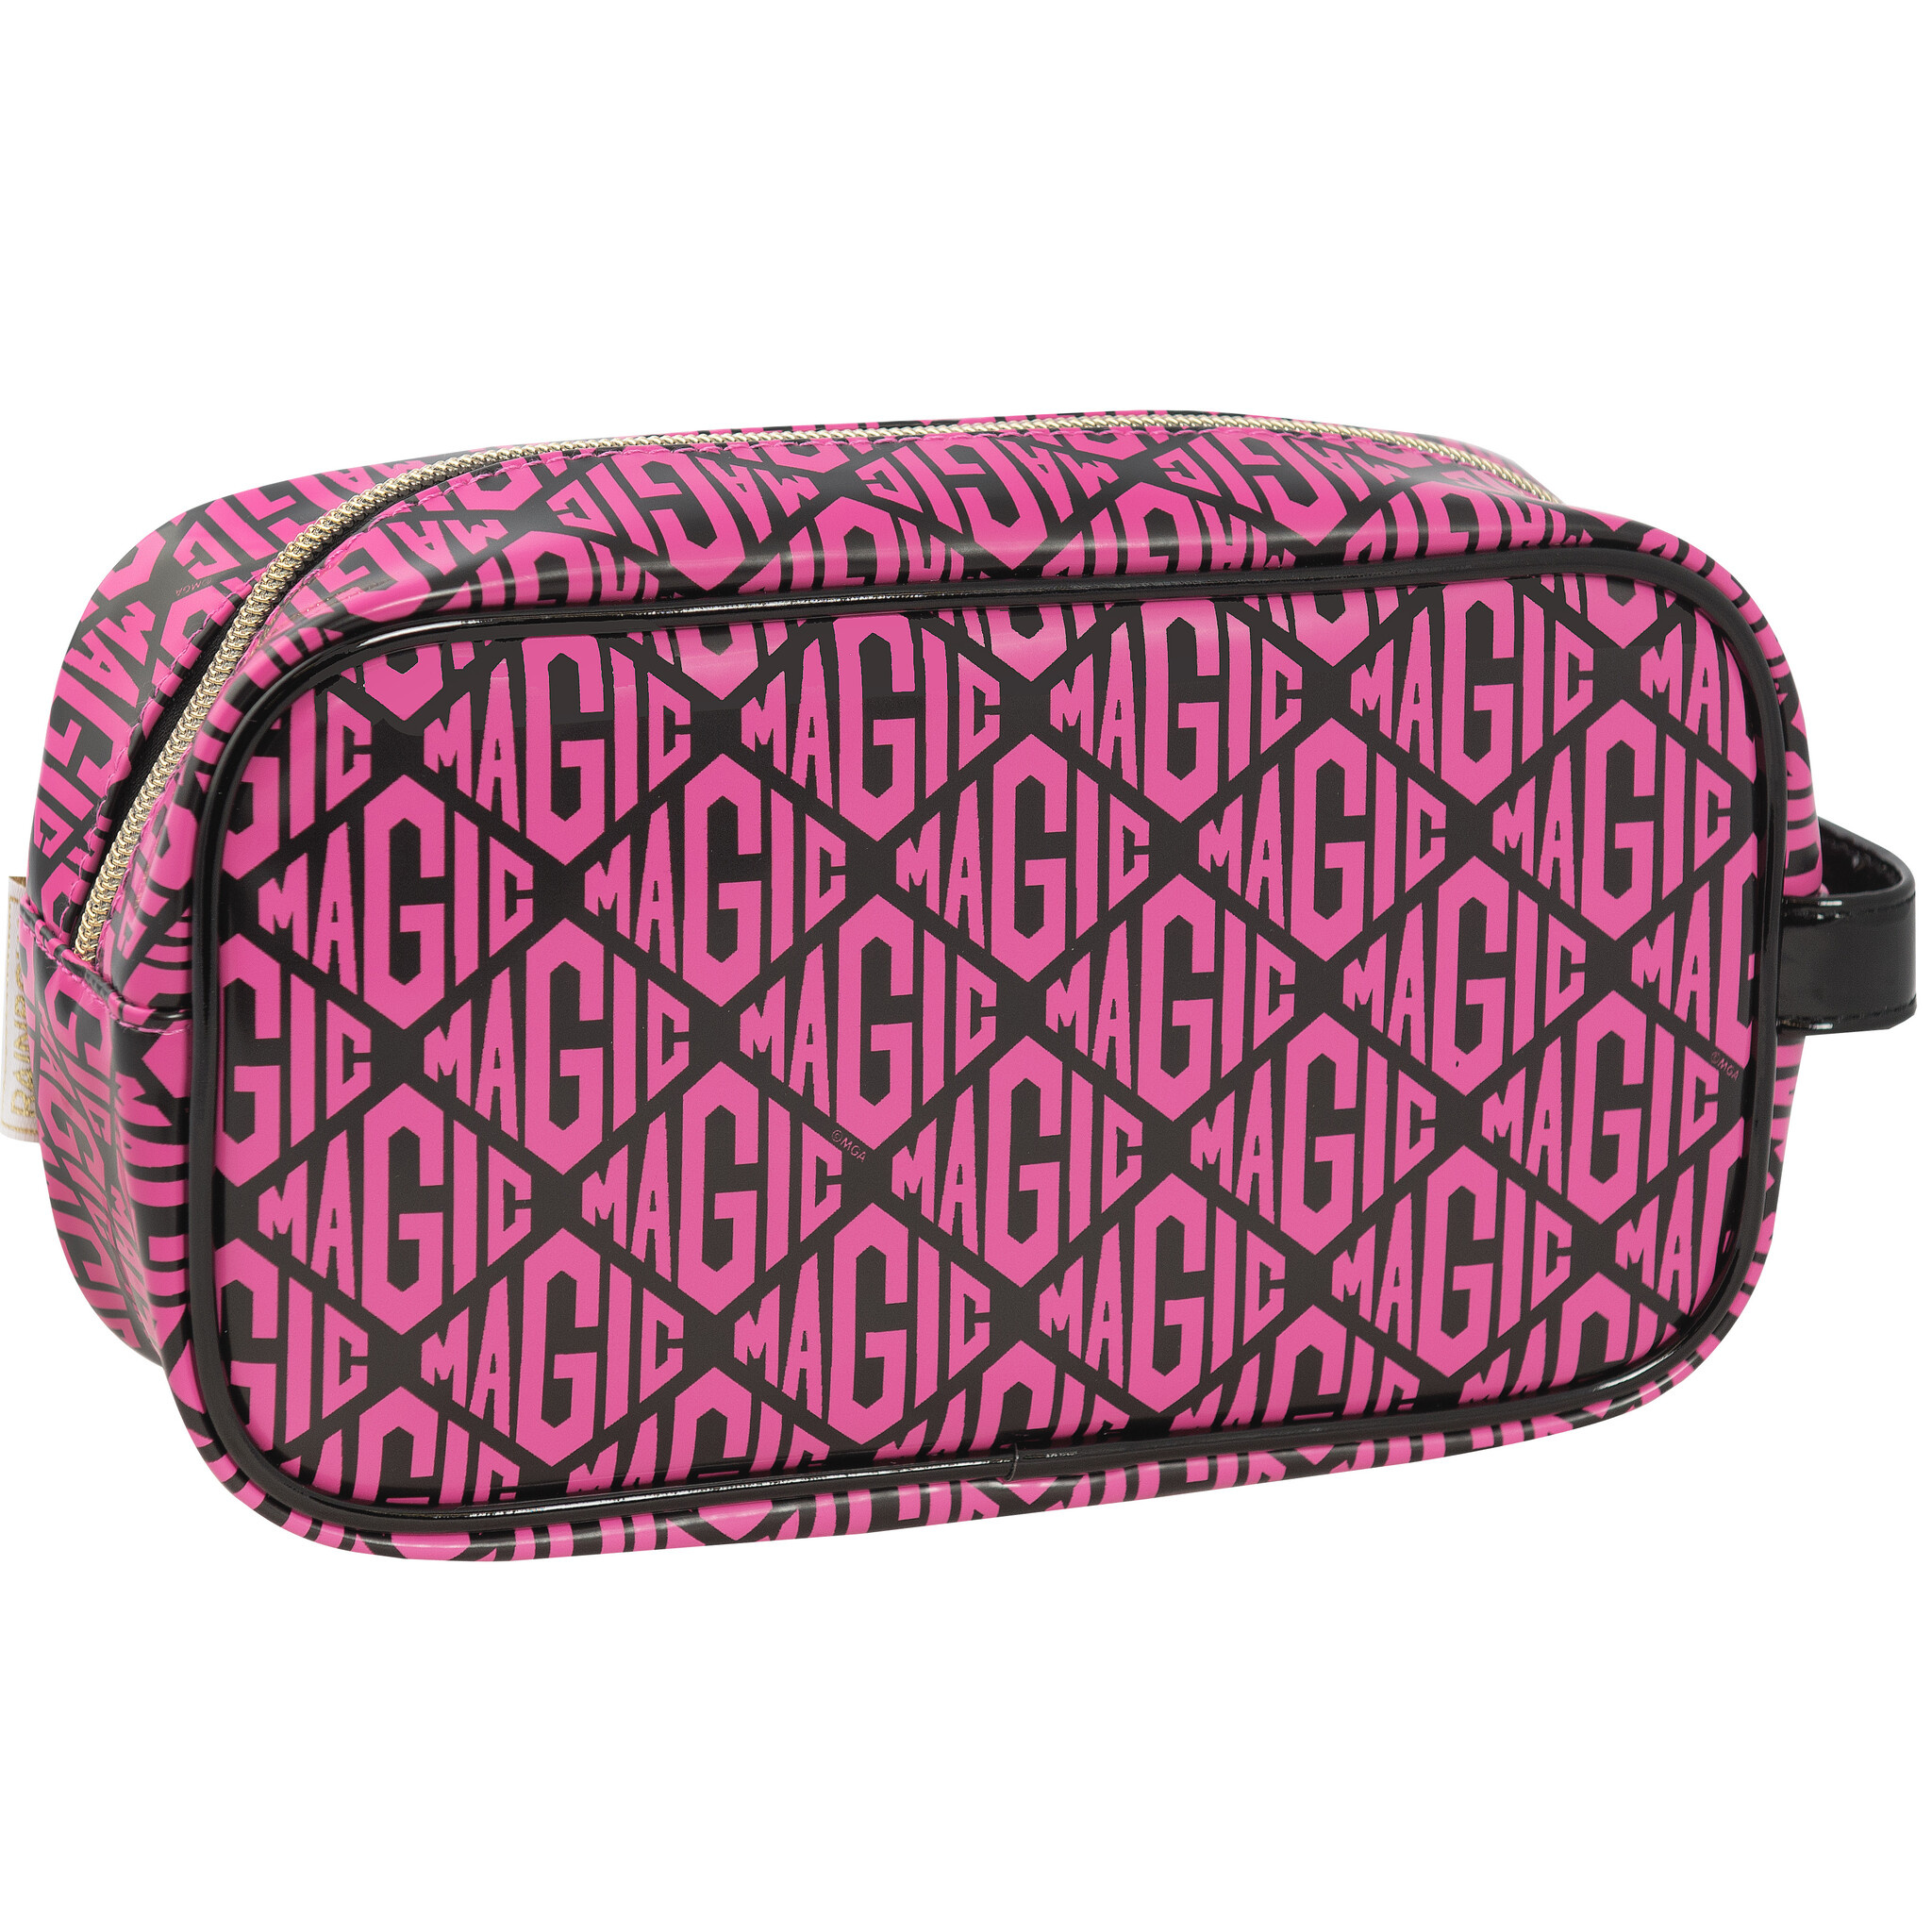 Rainbow High Toiletry bag, You are a Star - 22 x 12 x 8 cm - Polyester